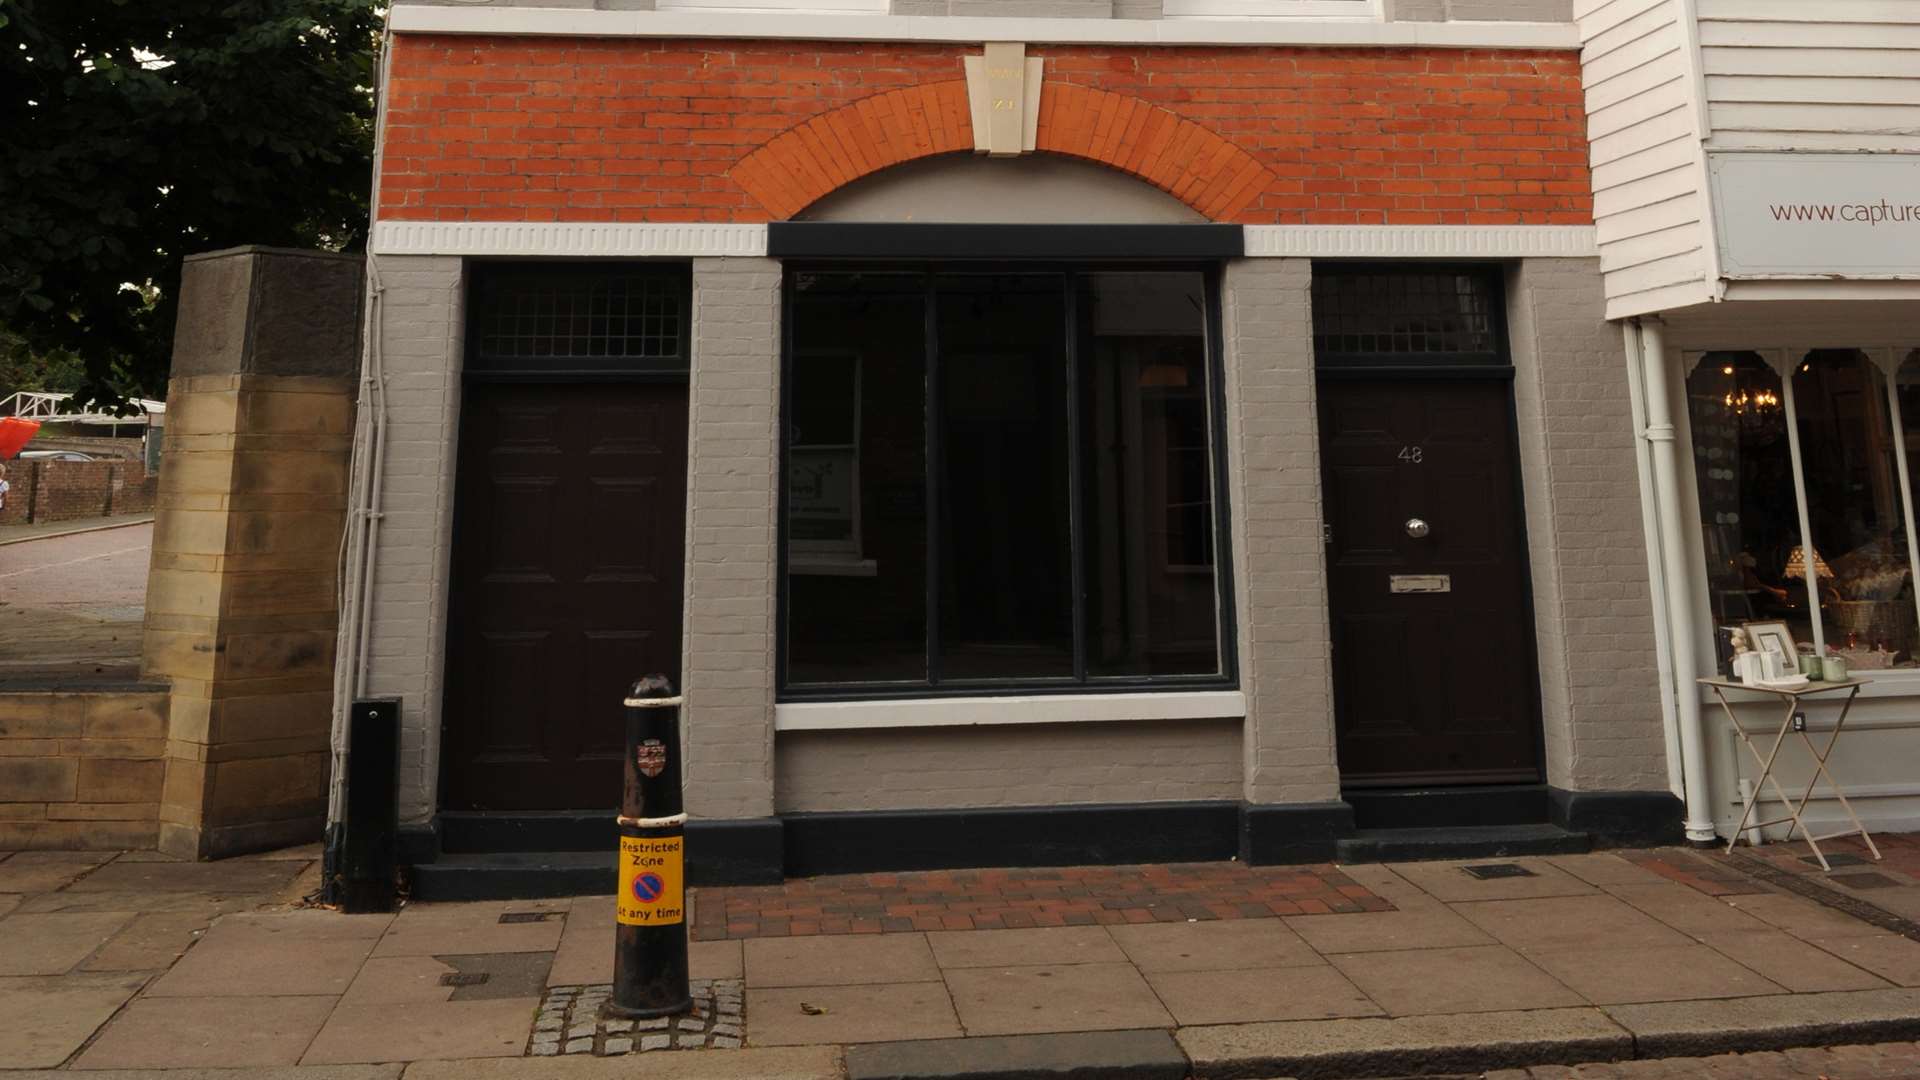 The pavement was found in the basement of this High Street property